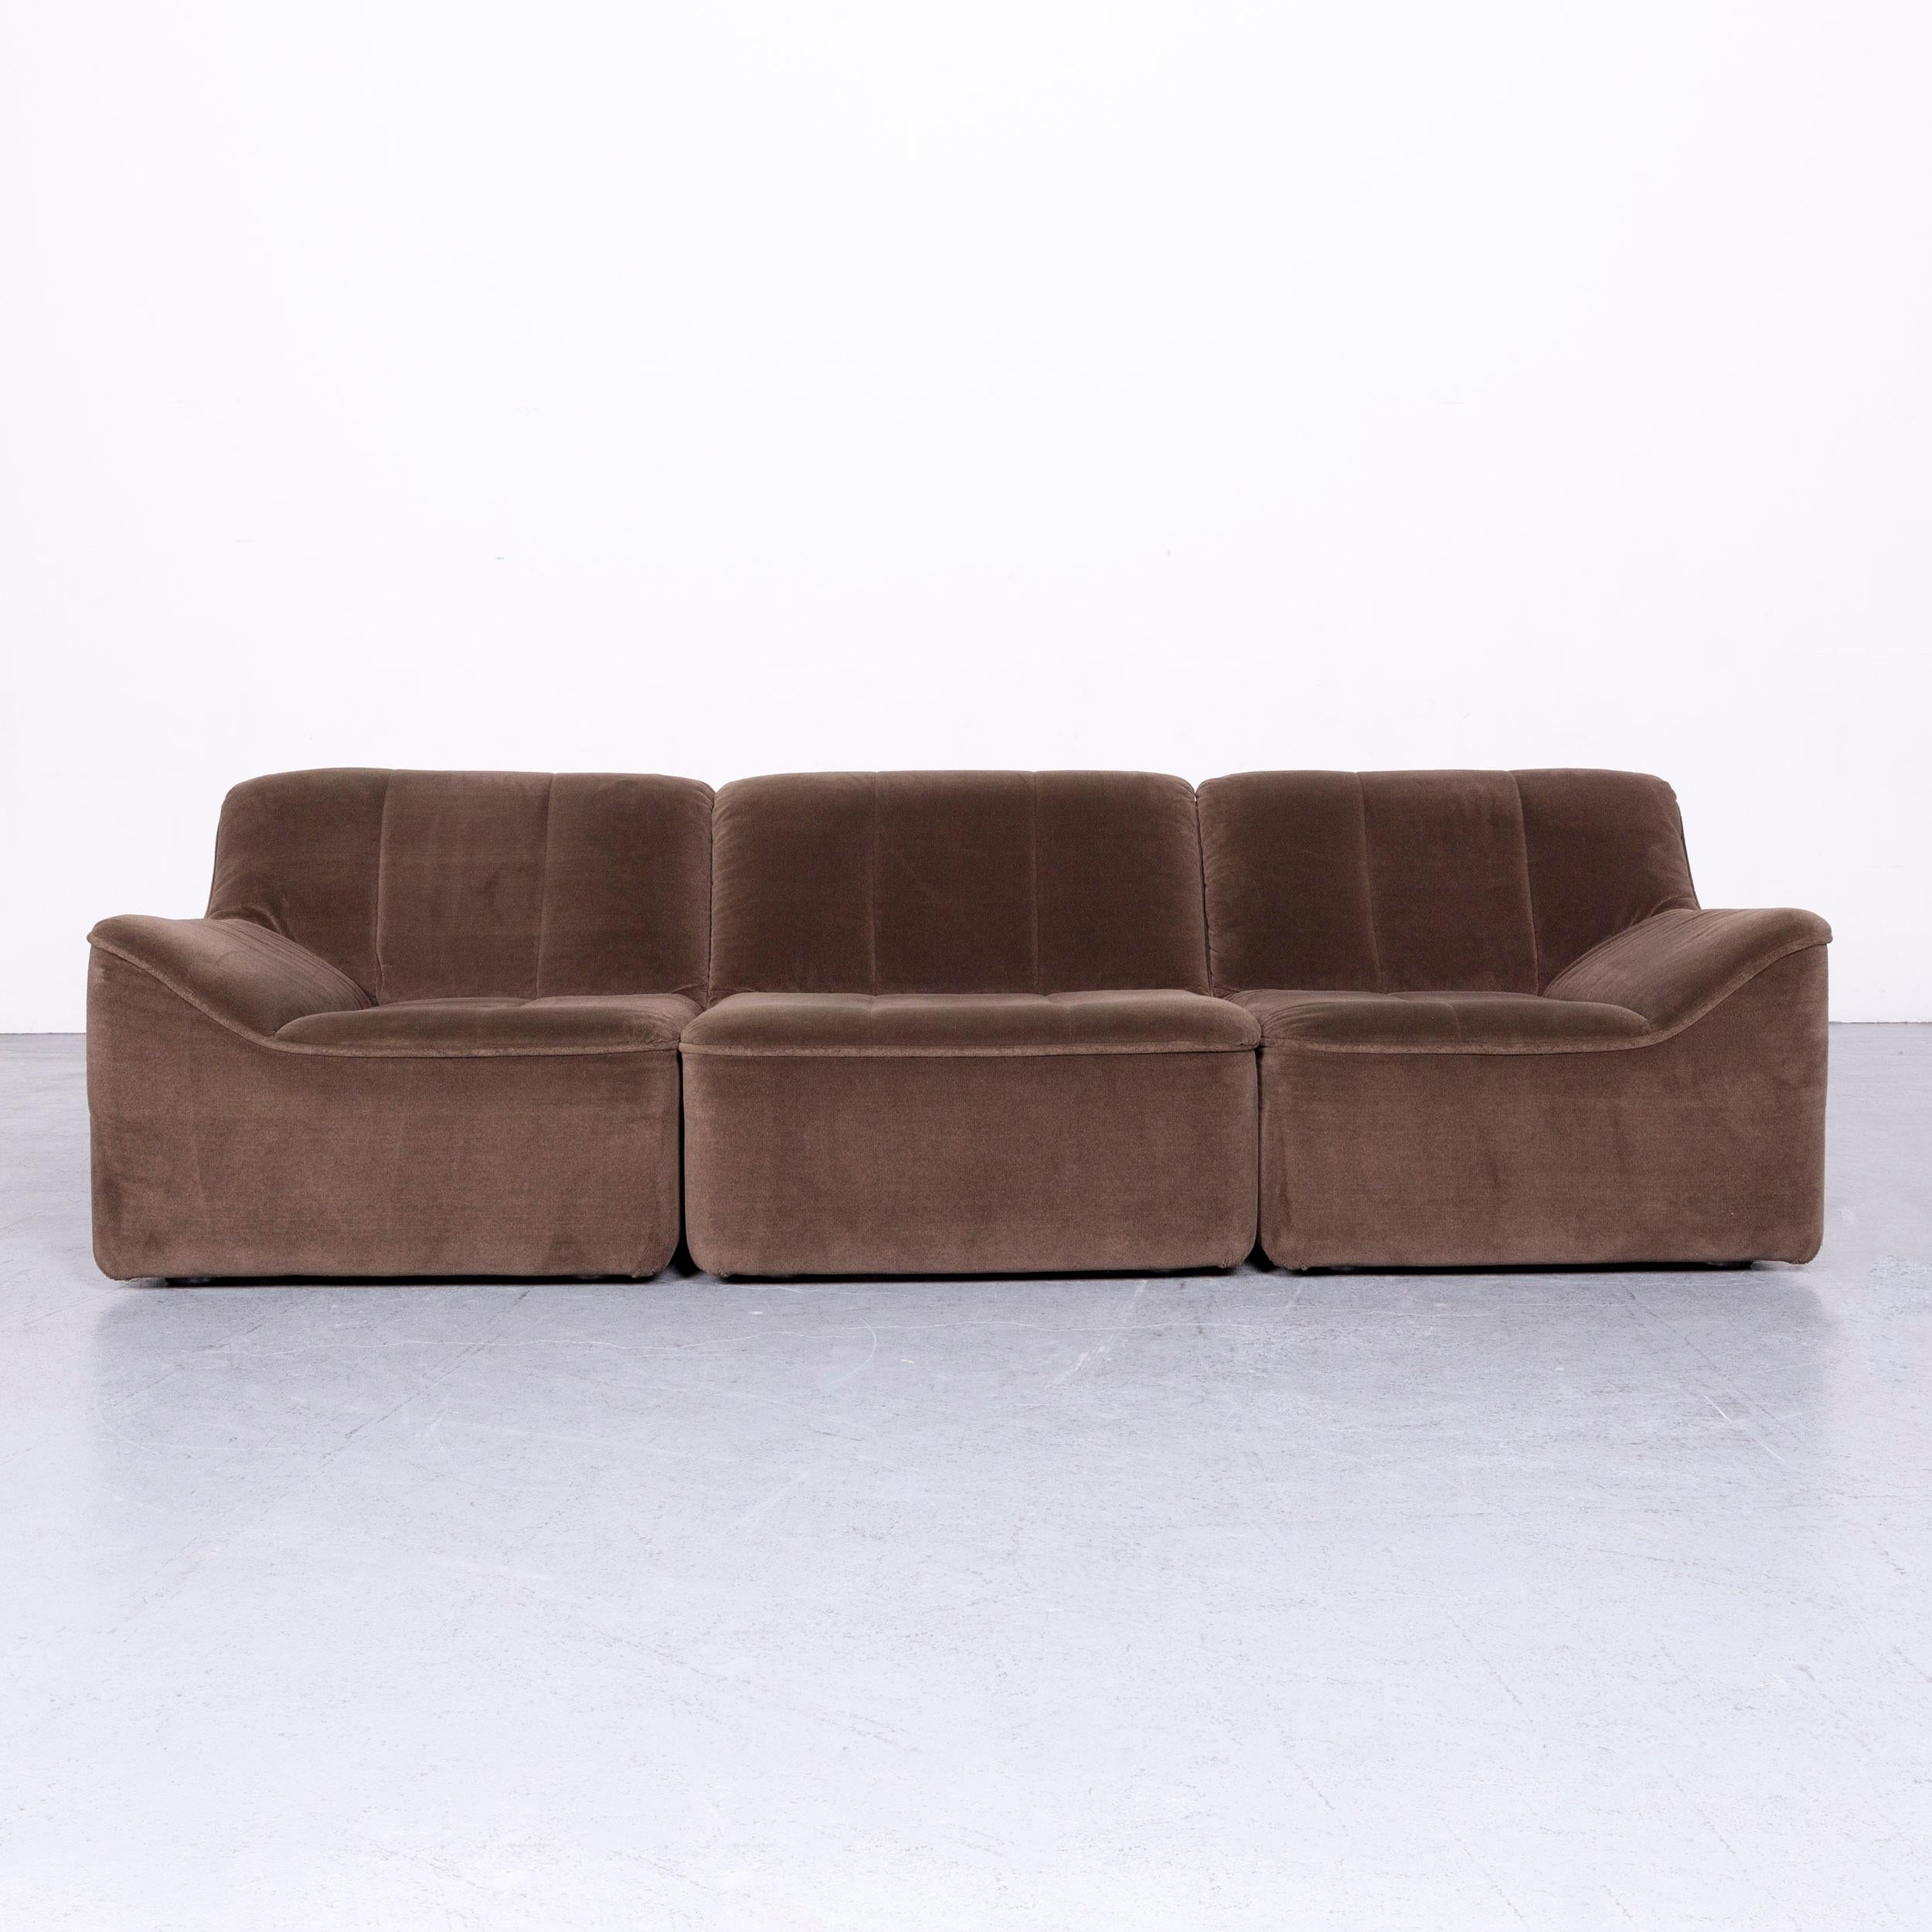 We bring to you a COR designer fabric sofa brown three-seat couch.

















